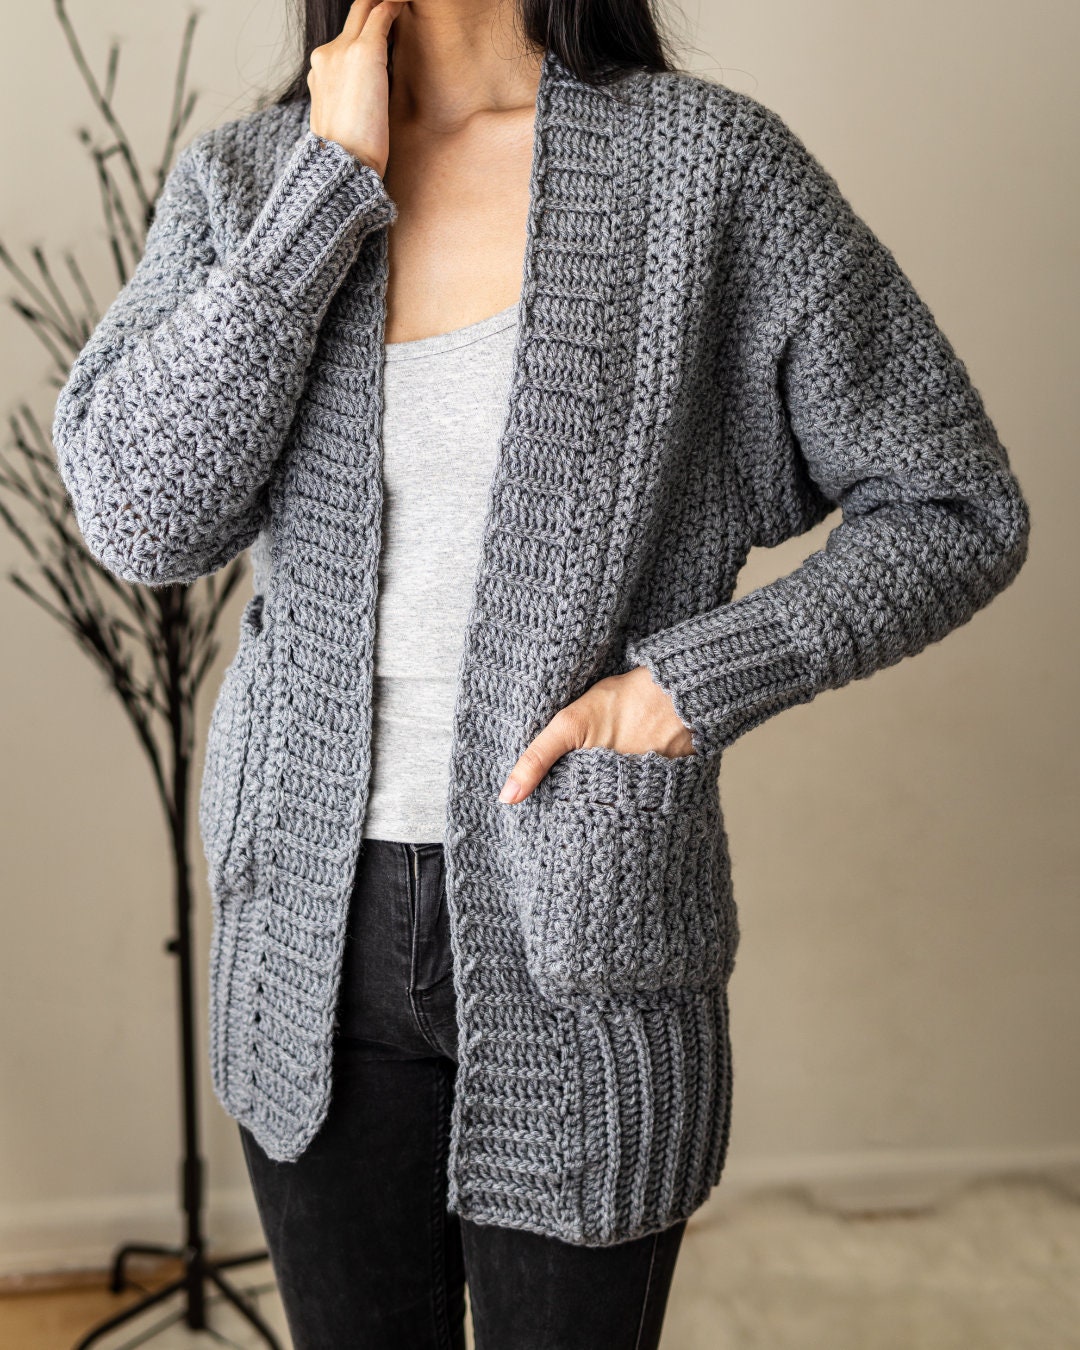 Crochet Pattern Batwing Cardigan With Pockets PDF Download - Etsy